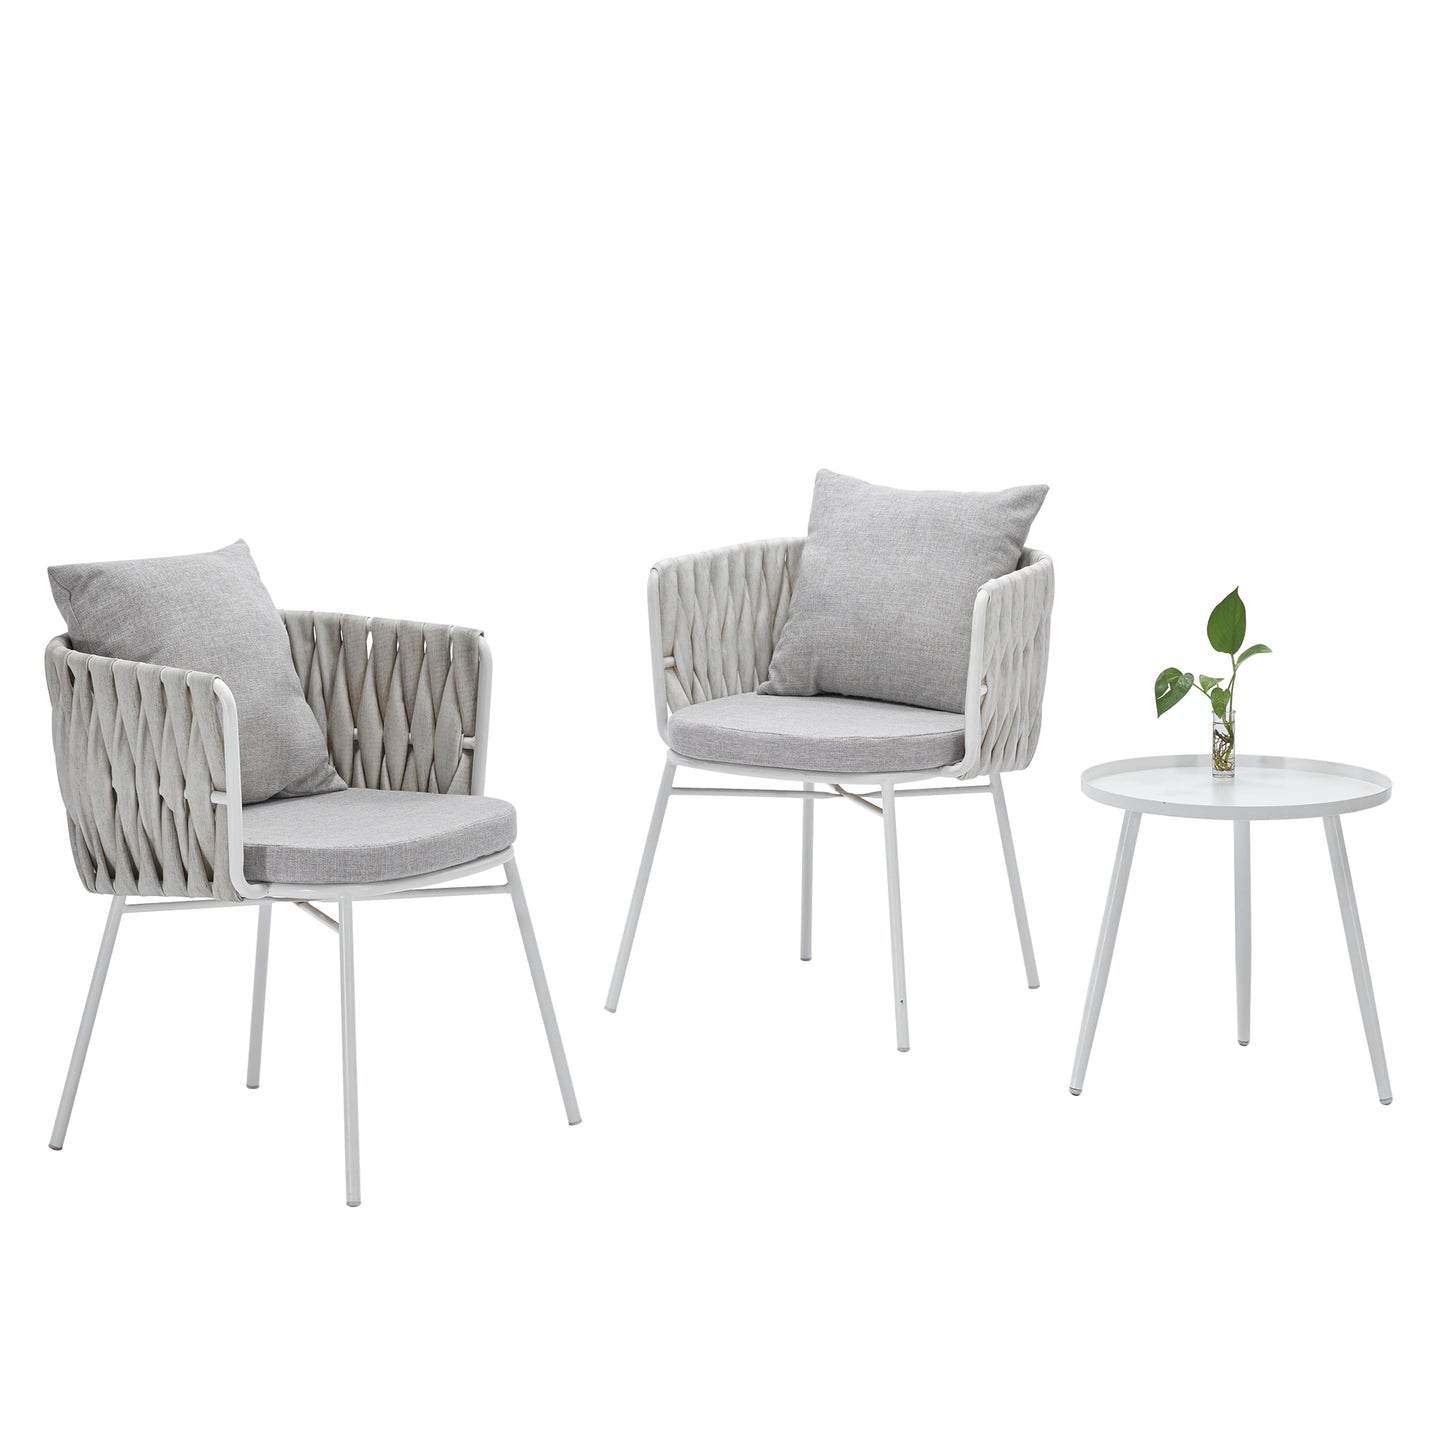 Indoor./Outdoor High Quality Rattan Garden Patio Coffee 3PCS Table and Chair Set, White Gray